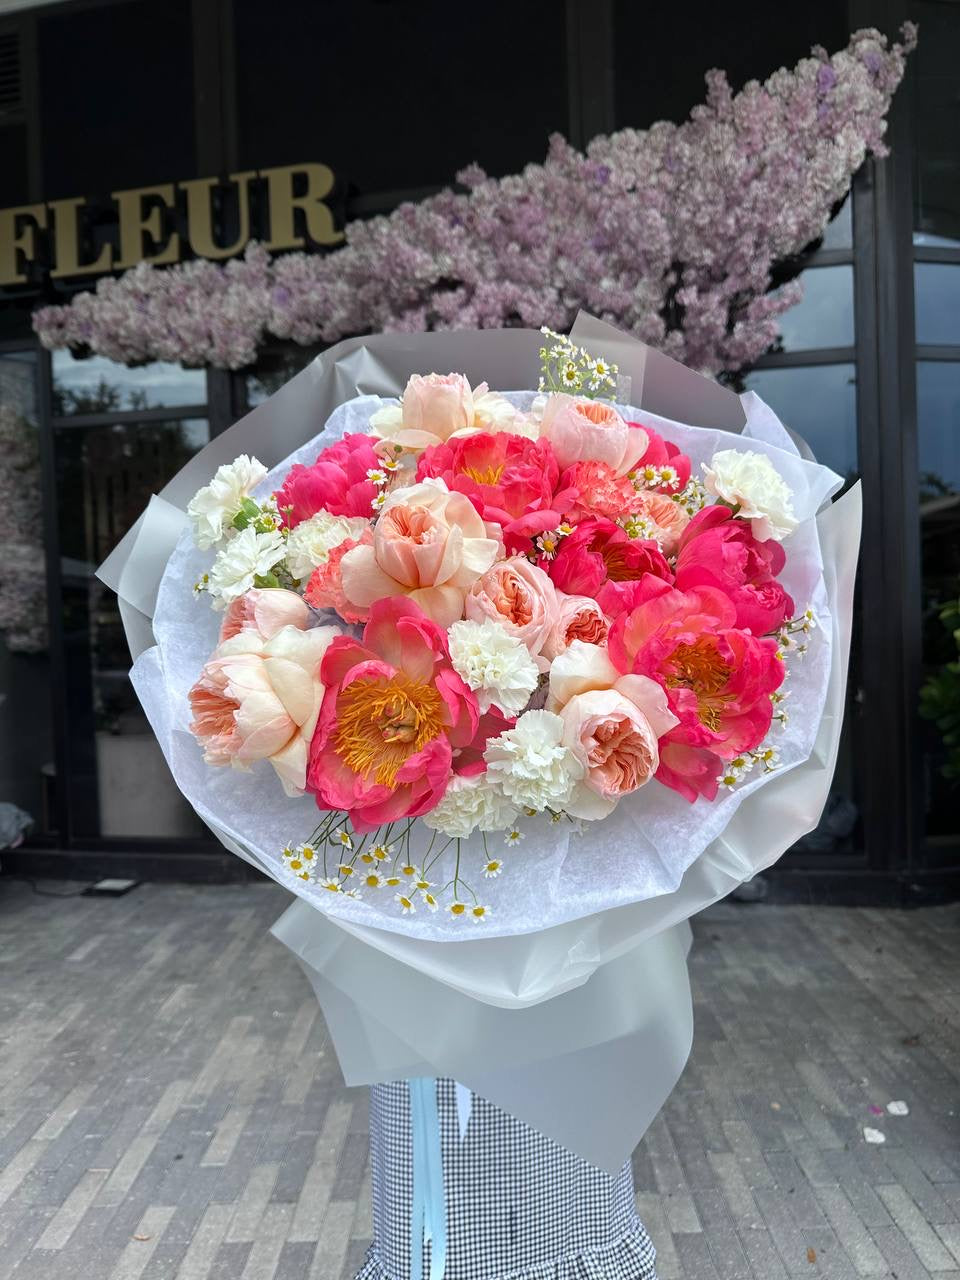 Live.Love.Coral - Garden David Austen roses, coral peonies, hydrangea, stock and dianthus